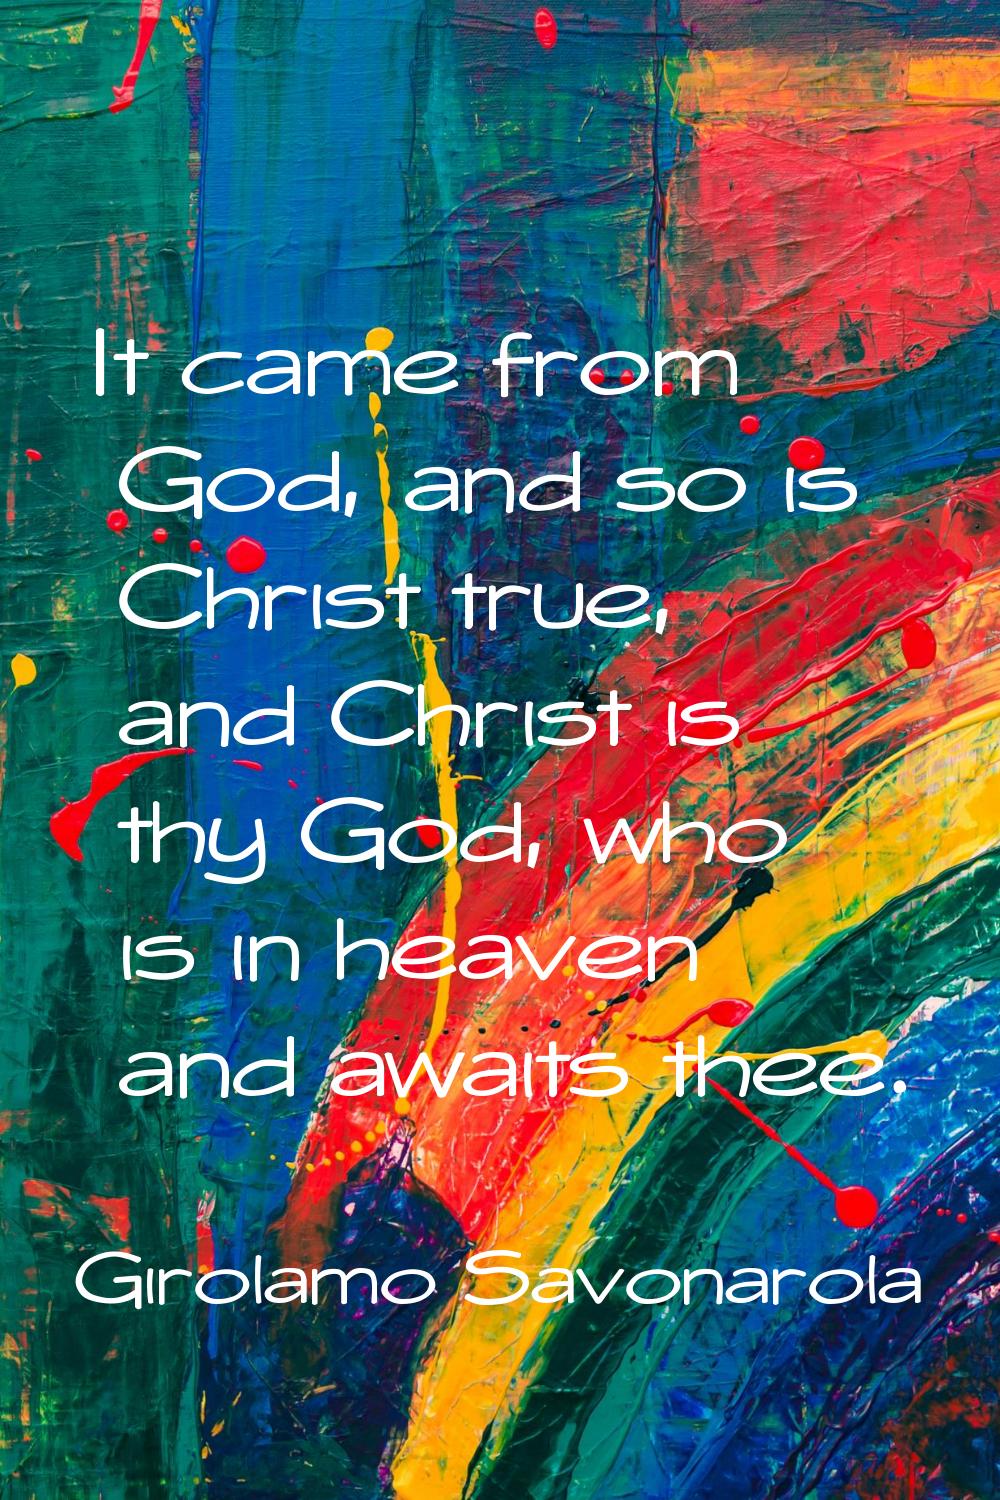 It came from God, and so is Christ true, and Christ is thy God, who is in heaven and awaits thee.